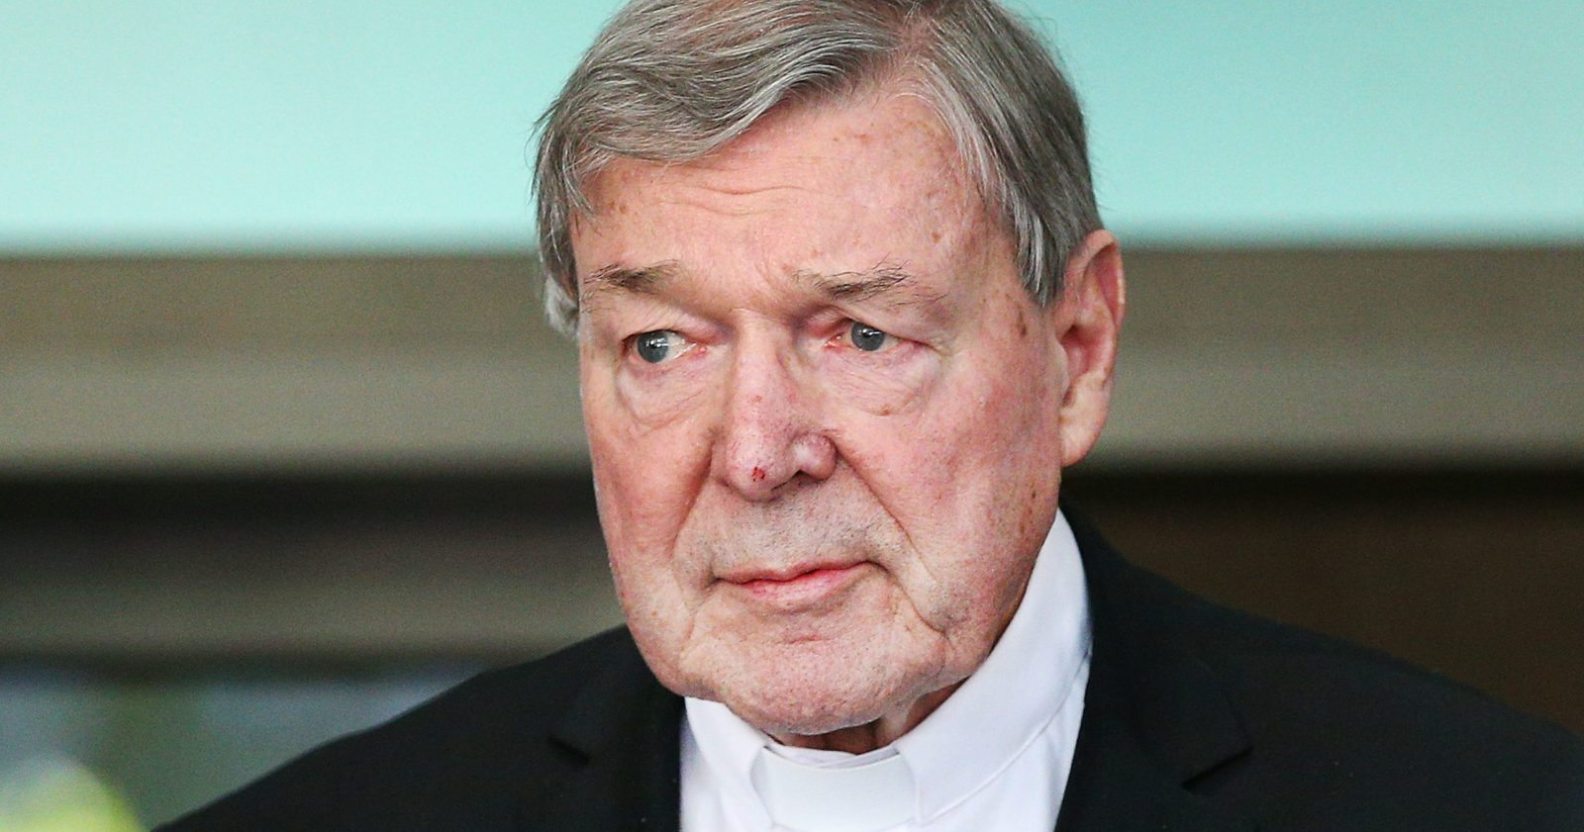 A photo of the late Cardinal George Pell wearing